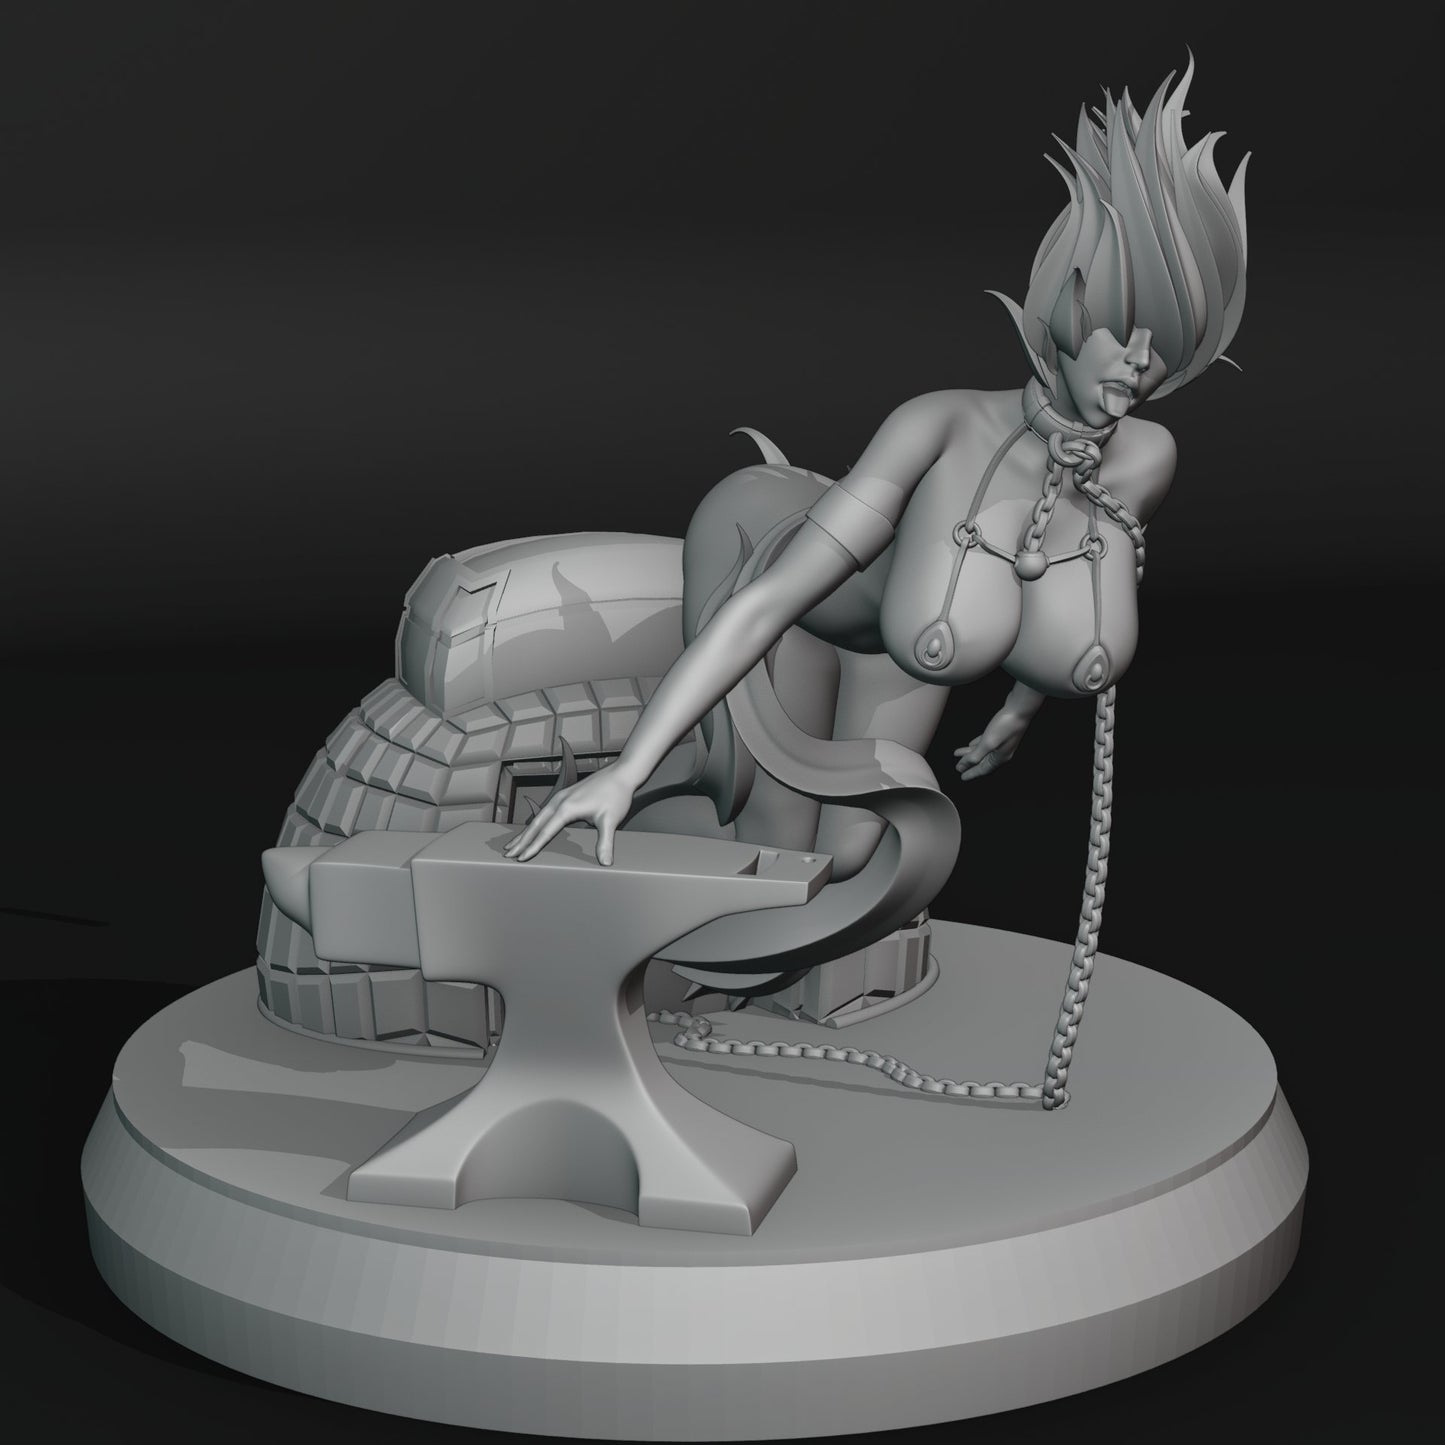 Fire Spirit 3d Printed miniature FanArt by QB works Scaled Collectables Statues & Figurines